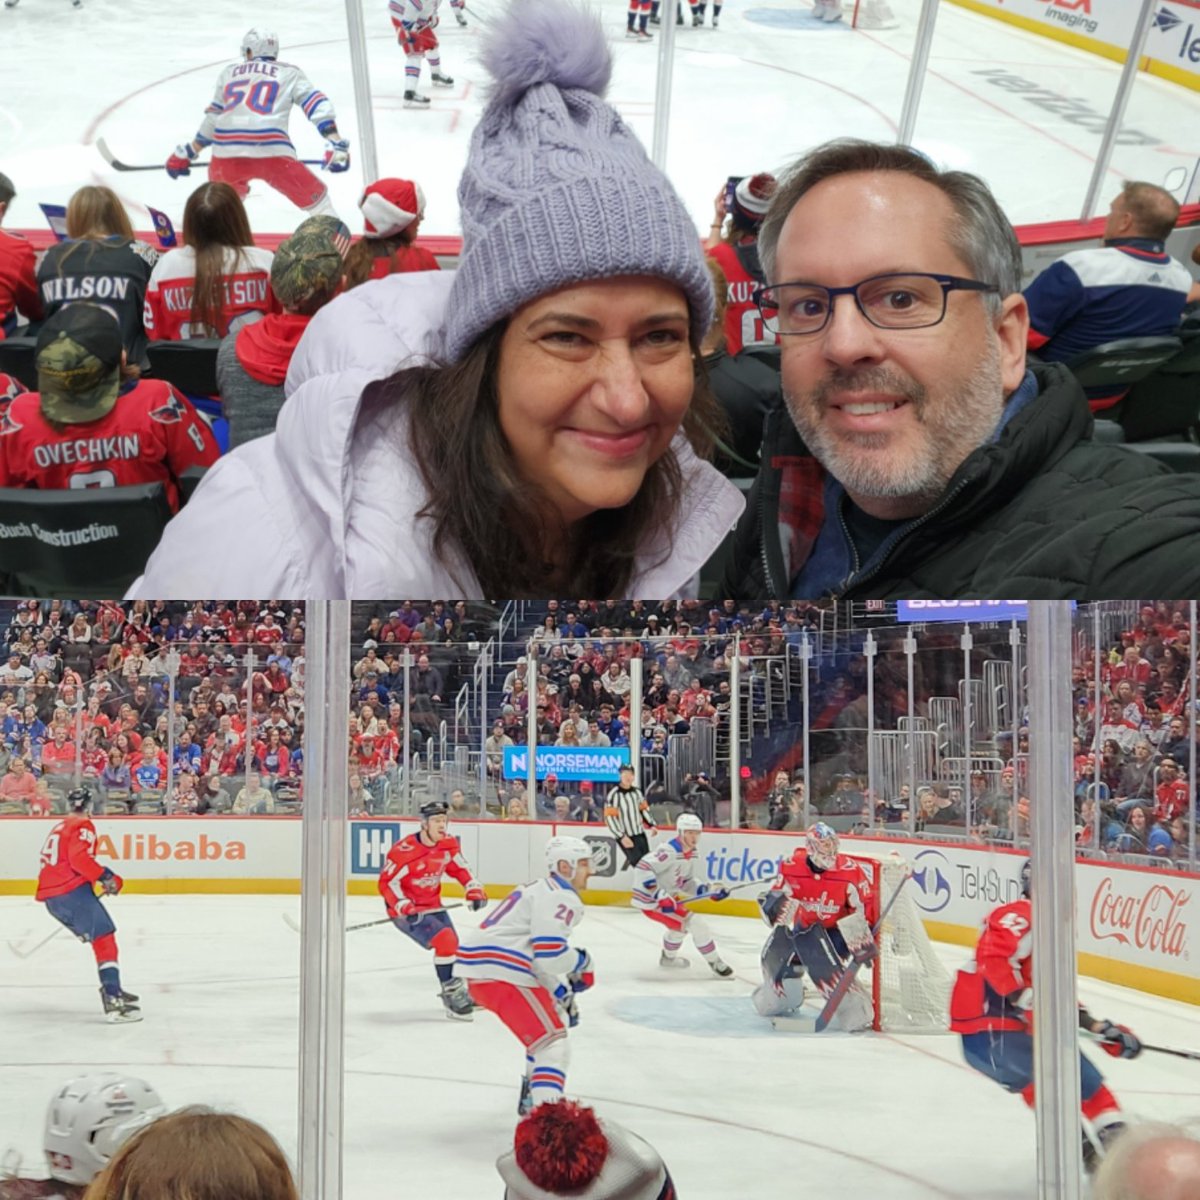 Chelle and I went to DC to see her @NYRangers today. Soon we'll be seeing these games in VA!